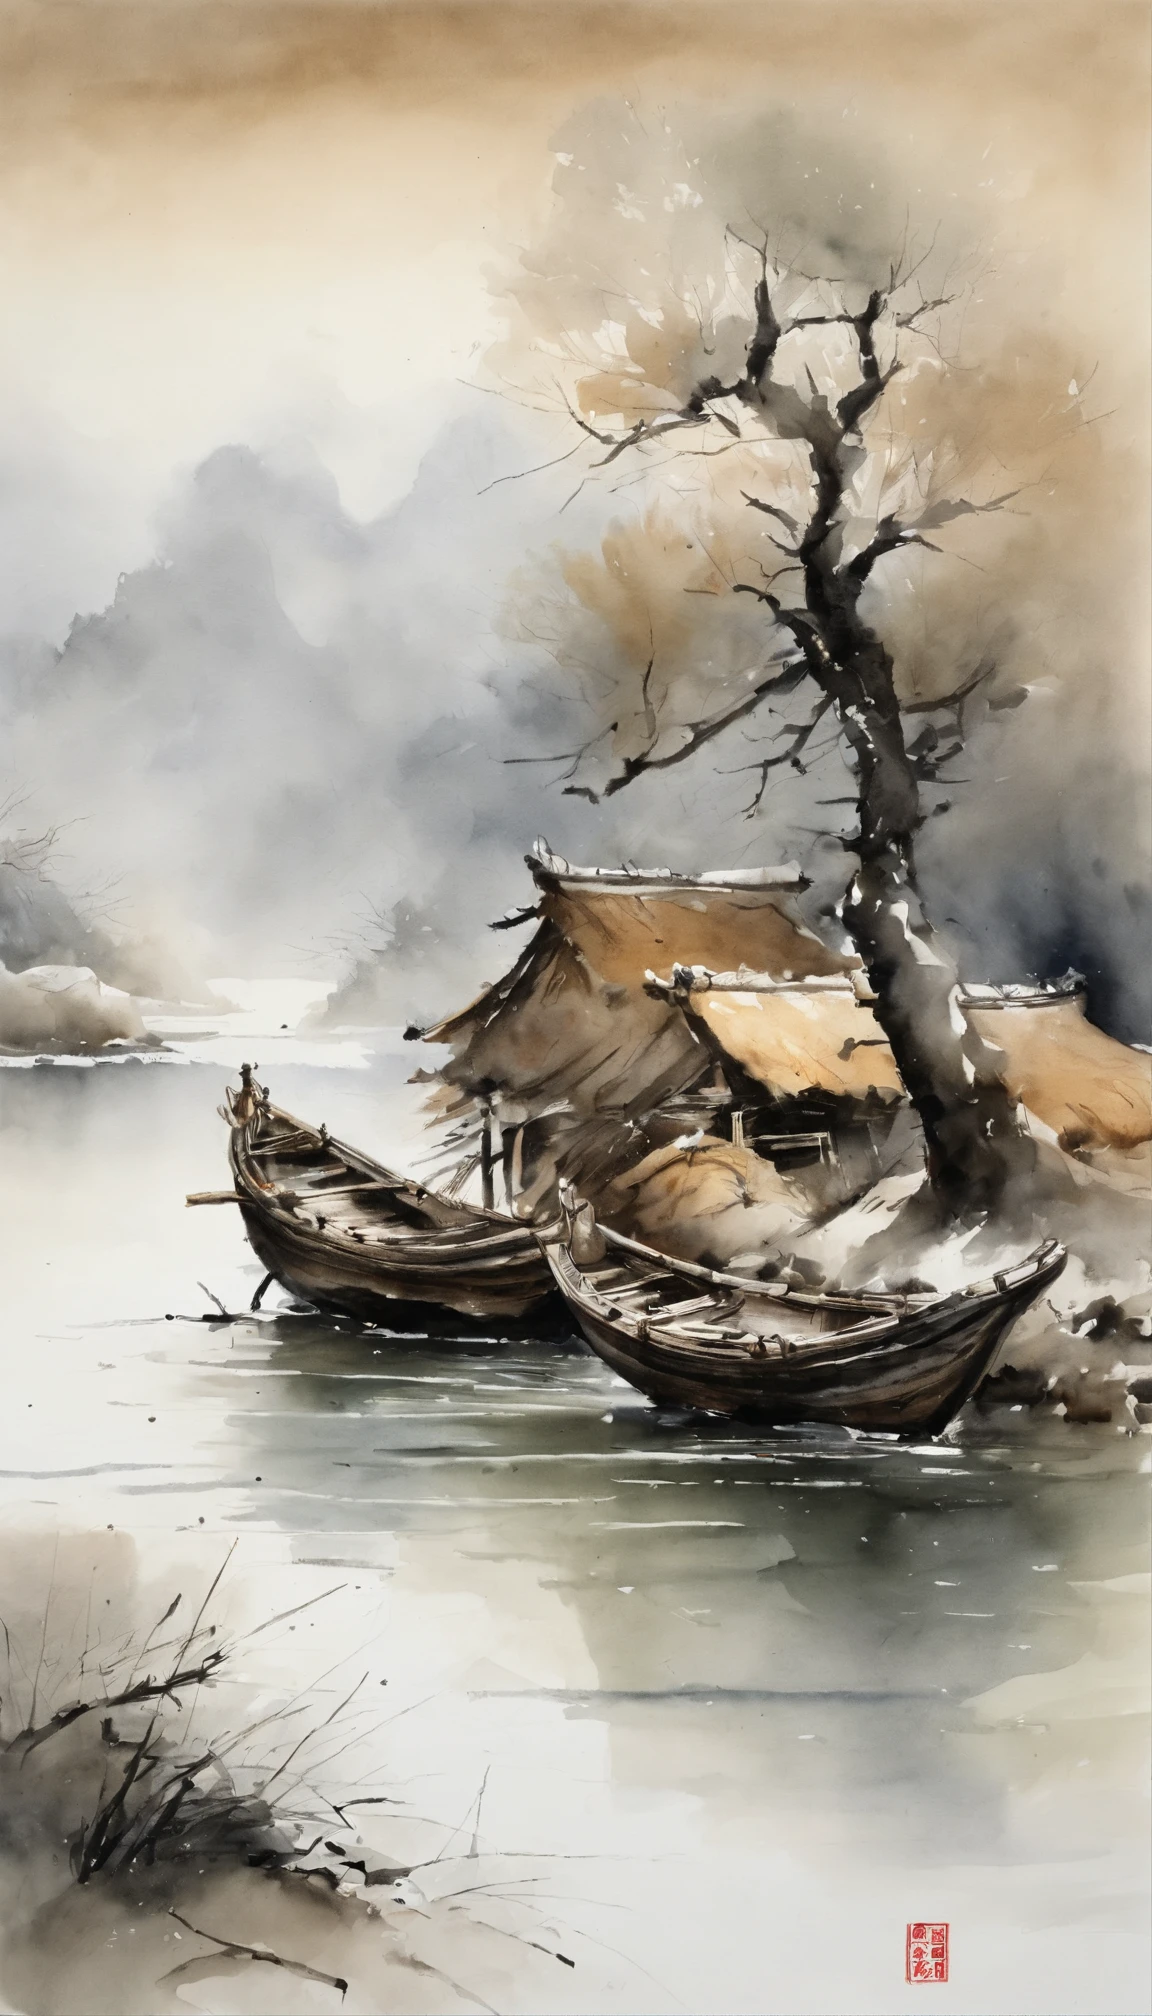 Chinese landscape painting，ink and watercolor painting，water ink，ink，Smudge，Faraway view，Ultra-wide viewing angle，Meticulous，Fishing boat vistaeticulous，Smudge，low-saturation，Low contrast，Fishing alone in the cold river snow，snow landscape，Beautifully depicted，A detailed，acurate，Works of masters，tmasterpiece